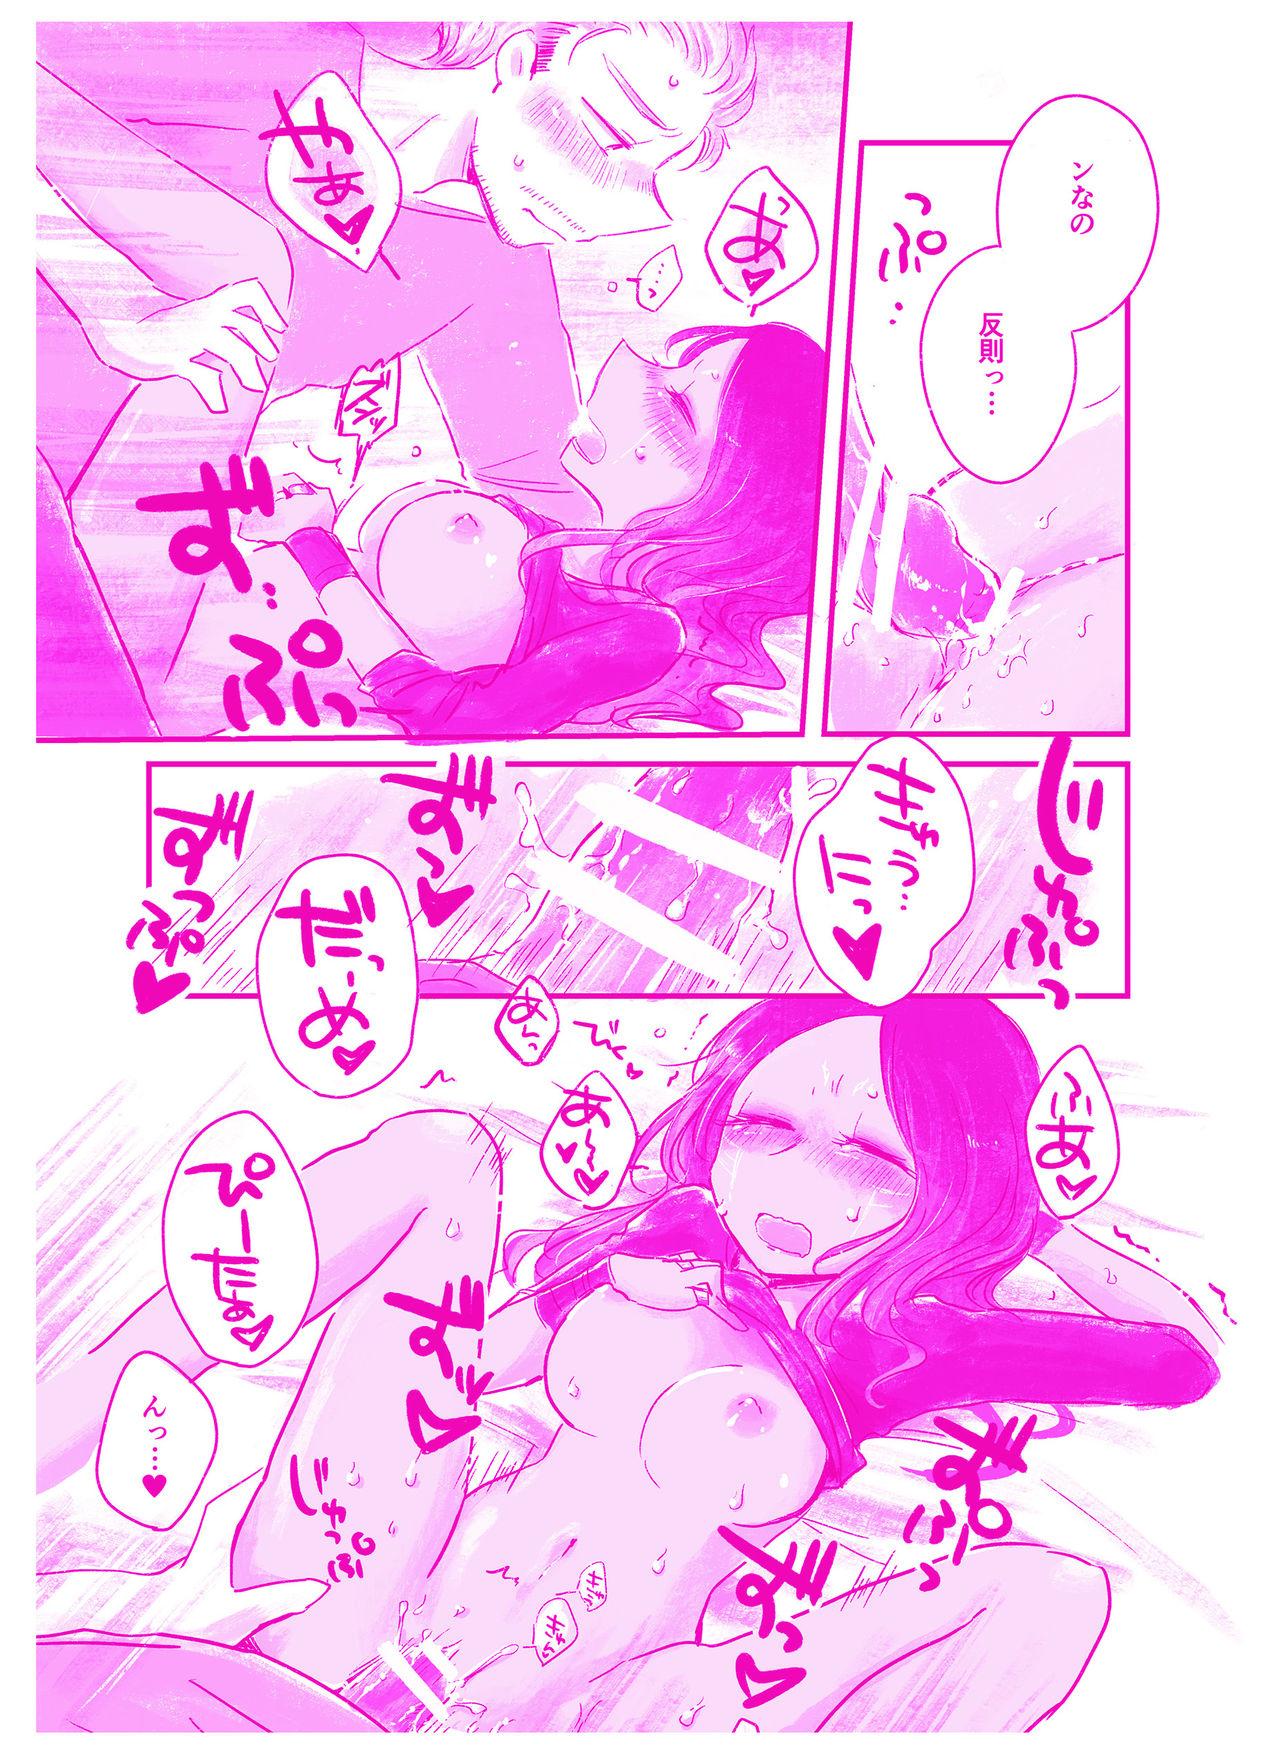 Ass Worship 言われてみてえもんだ - Guardians of the galaxy Missionary - Page 12